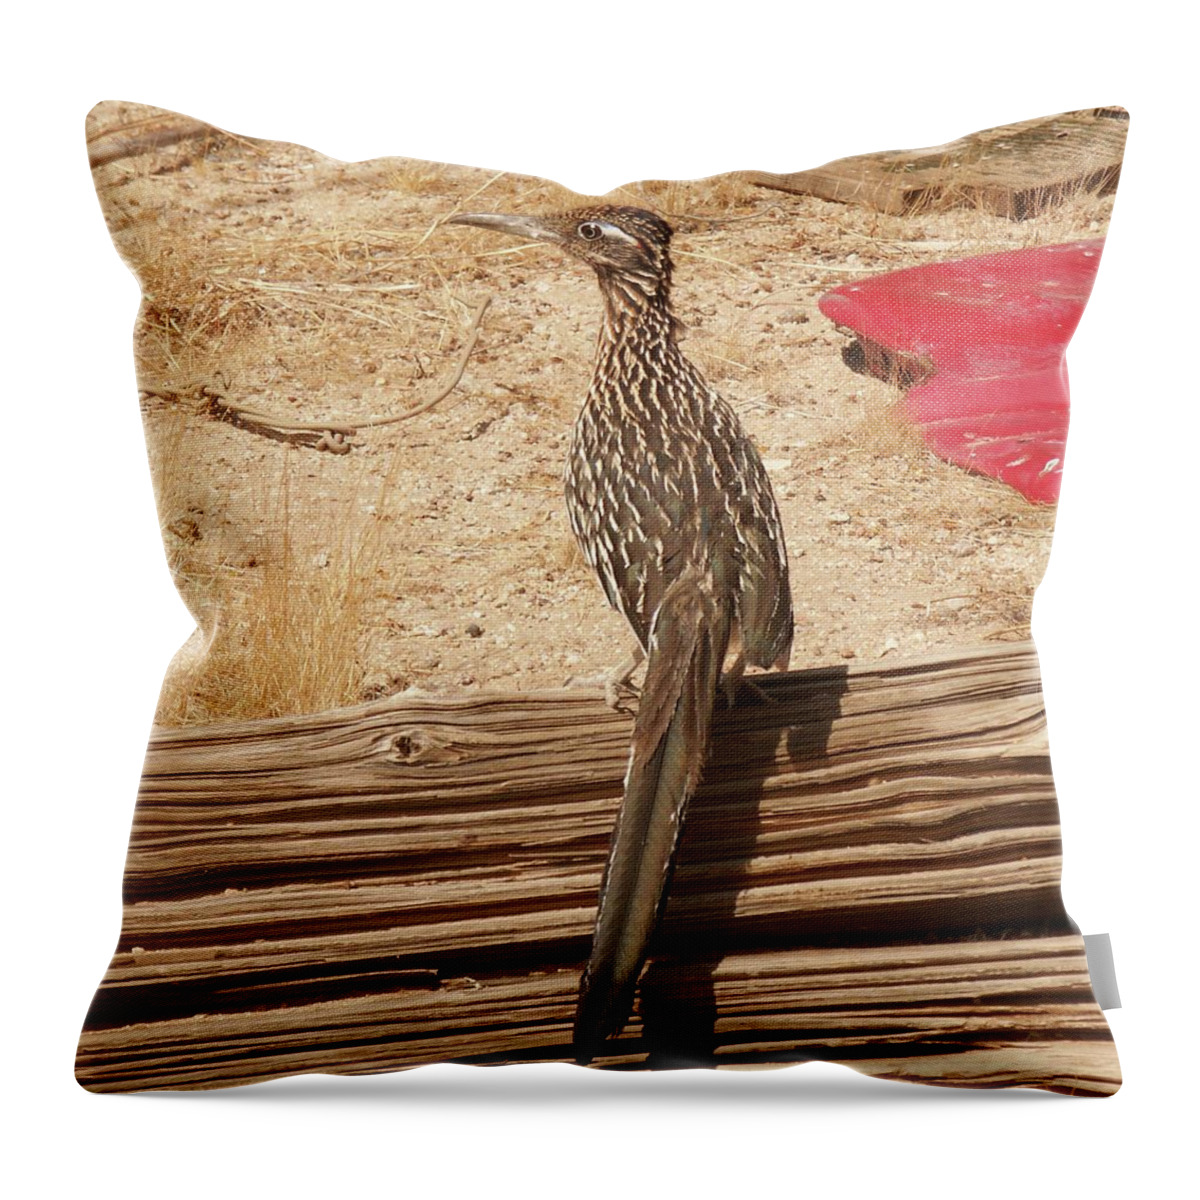 Roadrunner Throw Pillow featuring the photograph Roadrunner by Perry Hoffman